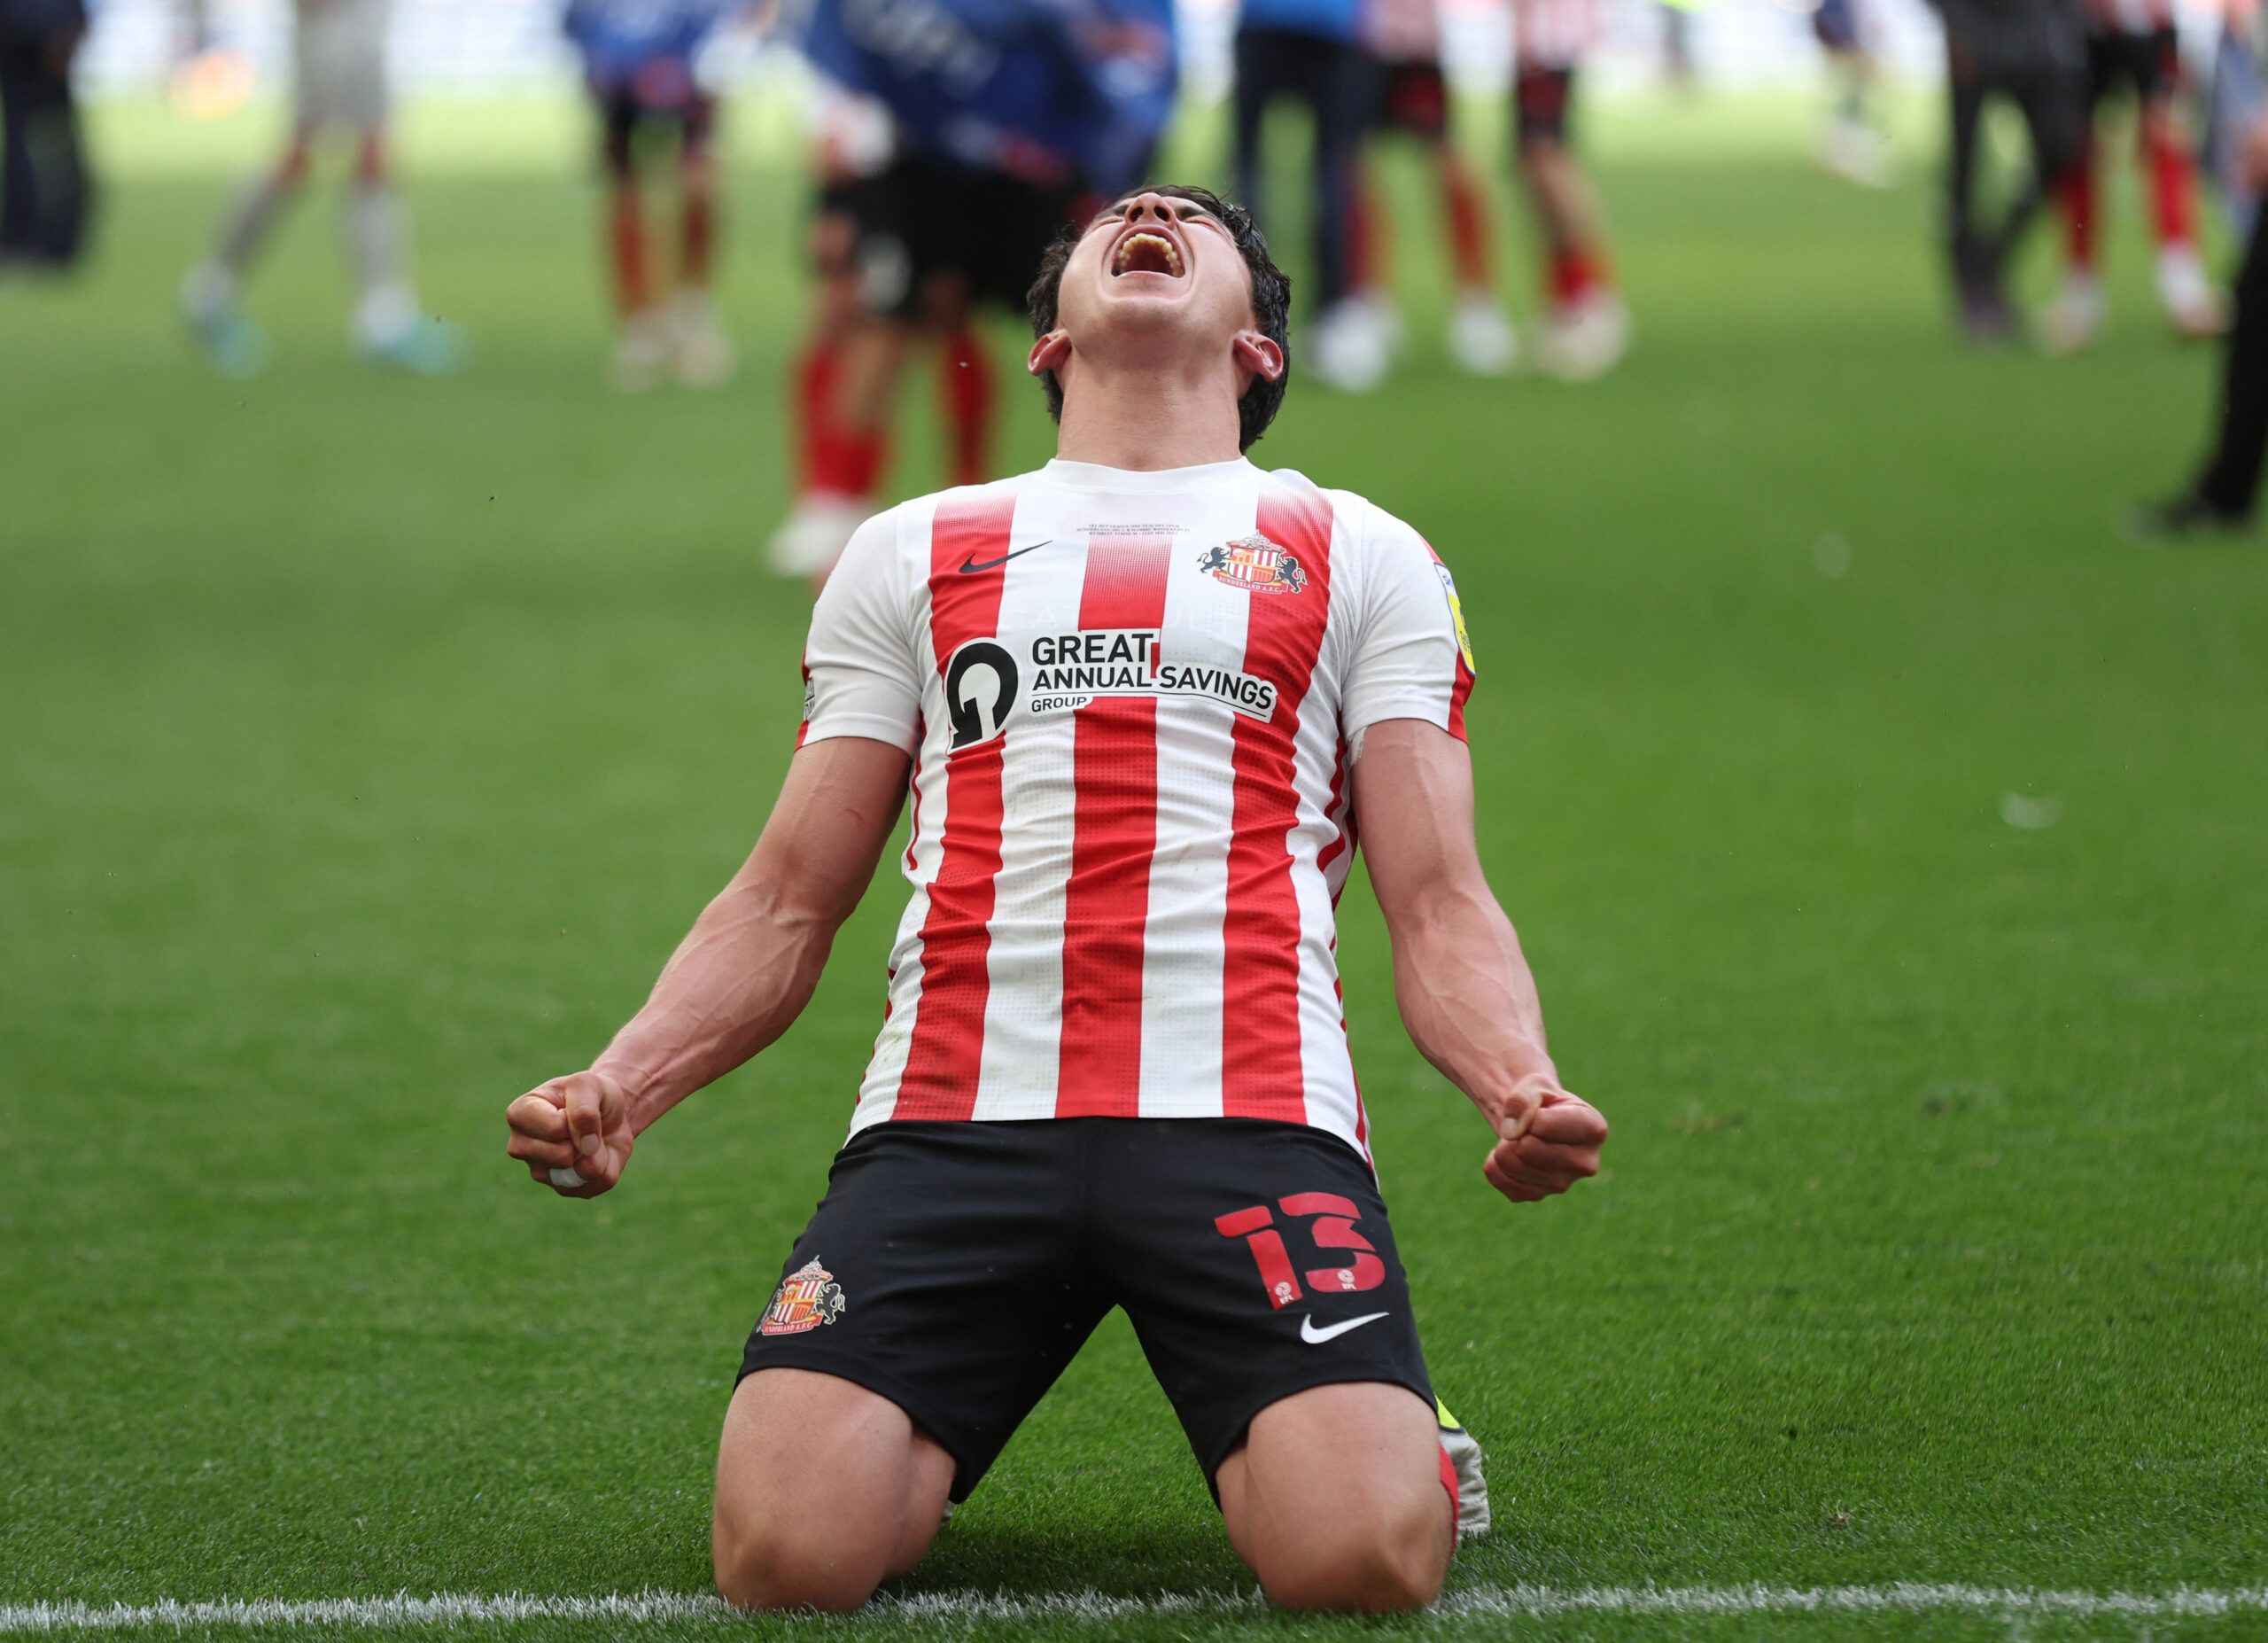 Soccer Football - League One Play-Off Final - Sunderland v Wycombe Wanderers - Wembley Stadium, London, Britain - May 21, 2022  Sunderland's Luke O'Nien celebrates after winning the League One Play-Off Action Images/Matthew Childs EDITORIAL USE ONLY. No use with unauthorized audio, video, data, fixture lists, club/league logos or 'live' services. Online in-match use limited to 75 images, no video emulation. No use in betting, games or single club /league/player publications.  Please contact your